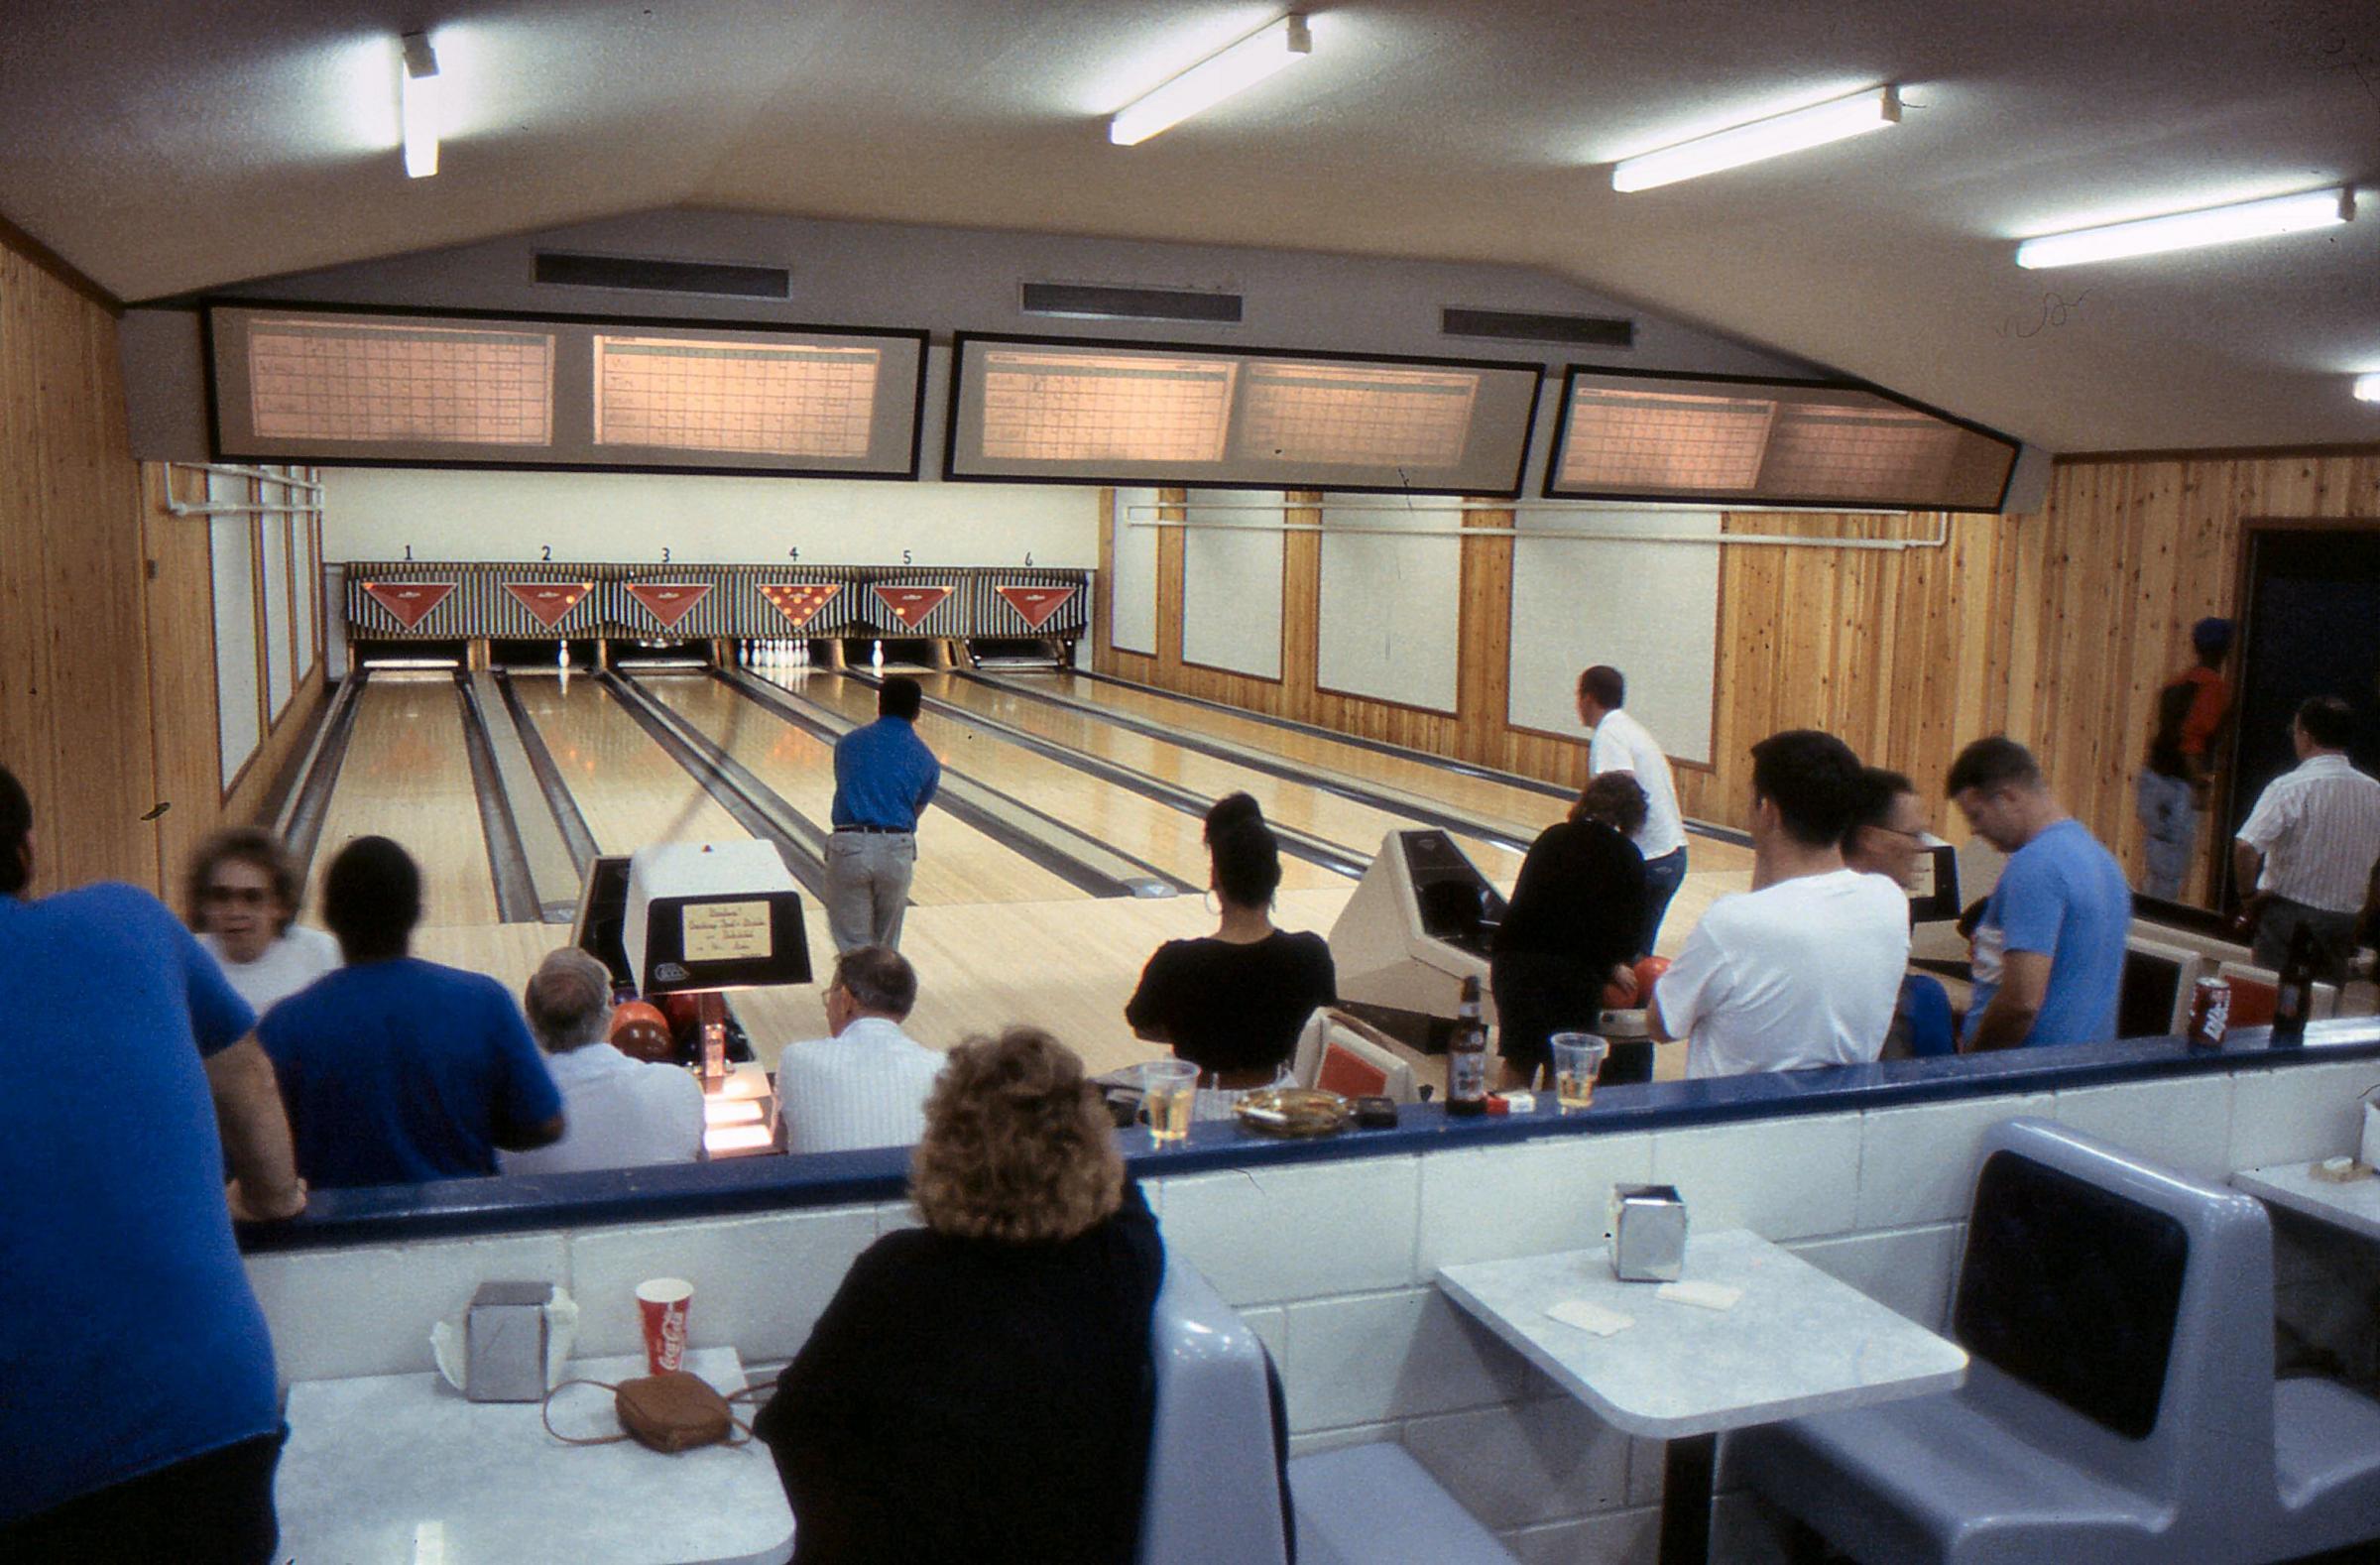 An on-site bowling alley for those based there to spend downtime in (Images: Eddie Whitham)